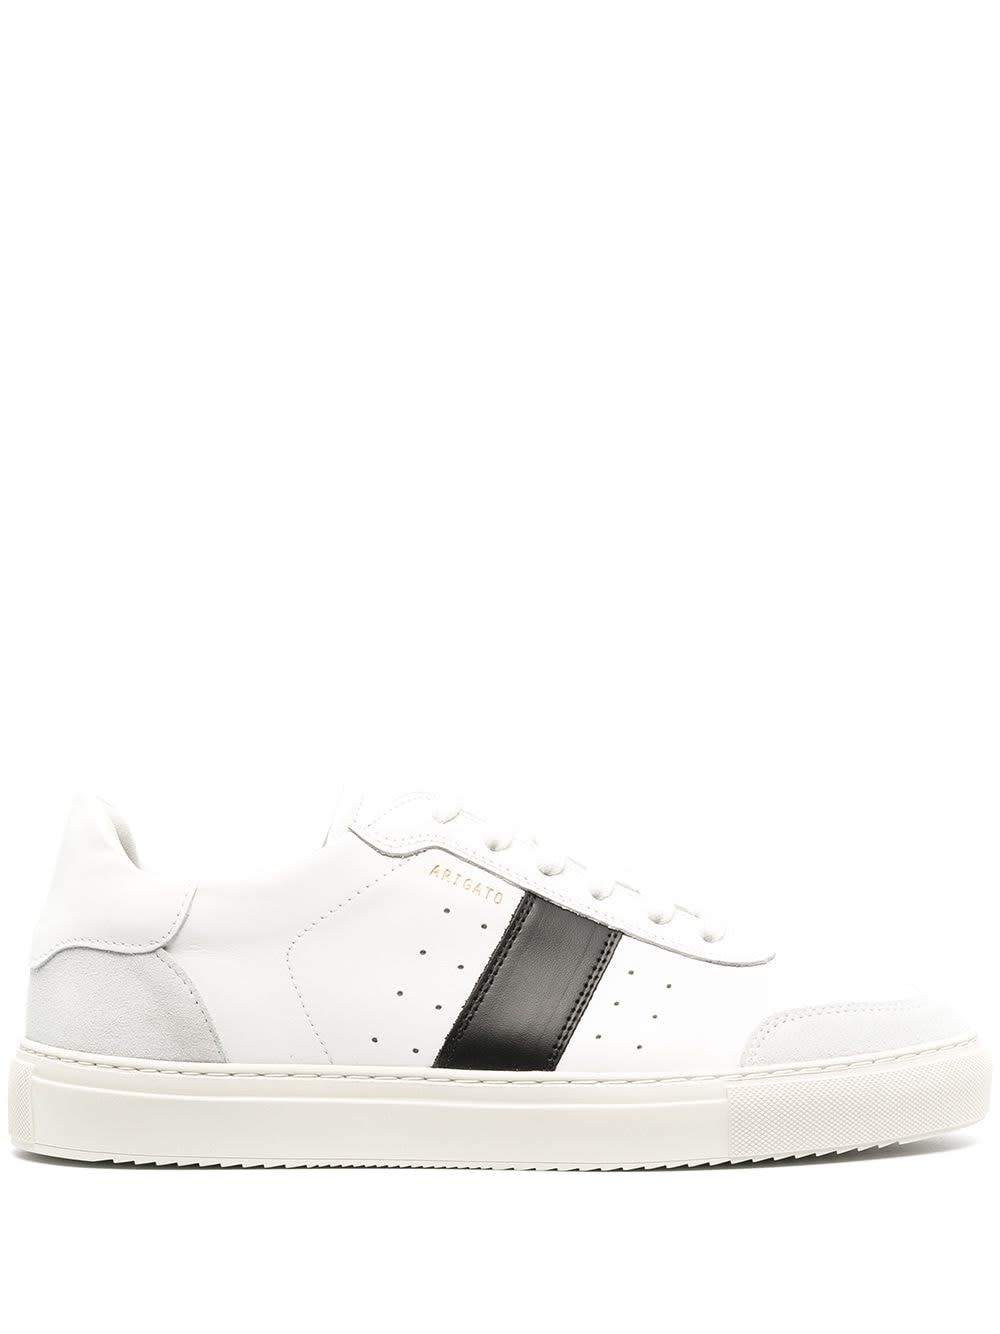 Axel Arigato White Leather Sneakers With Contrasting Panel